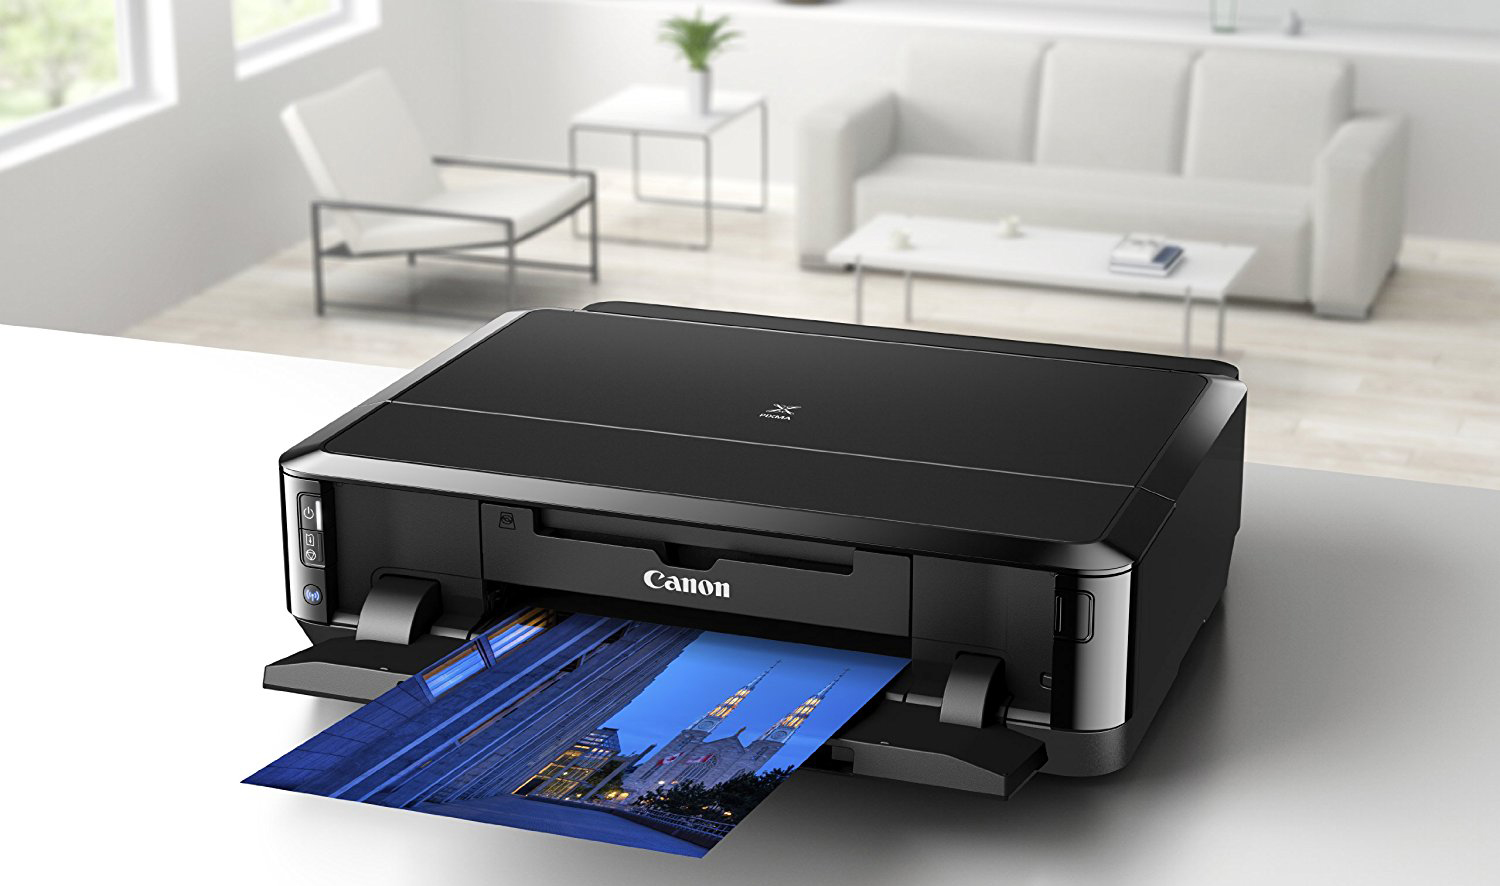 printers for macs canon scanning and printing